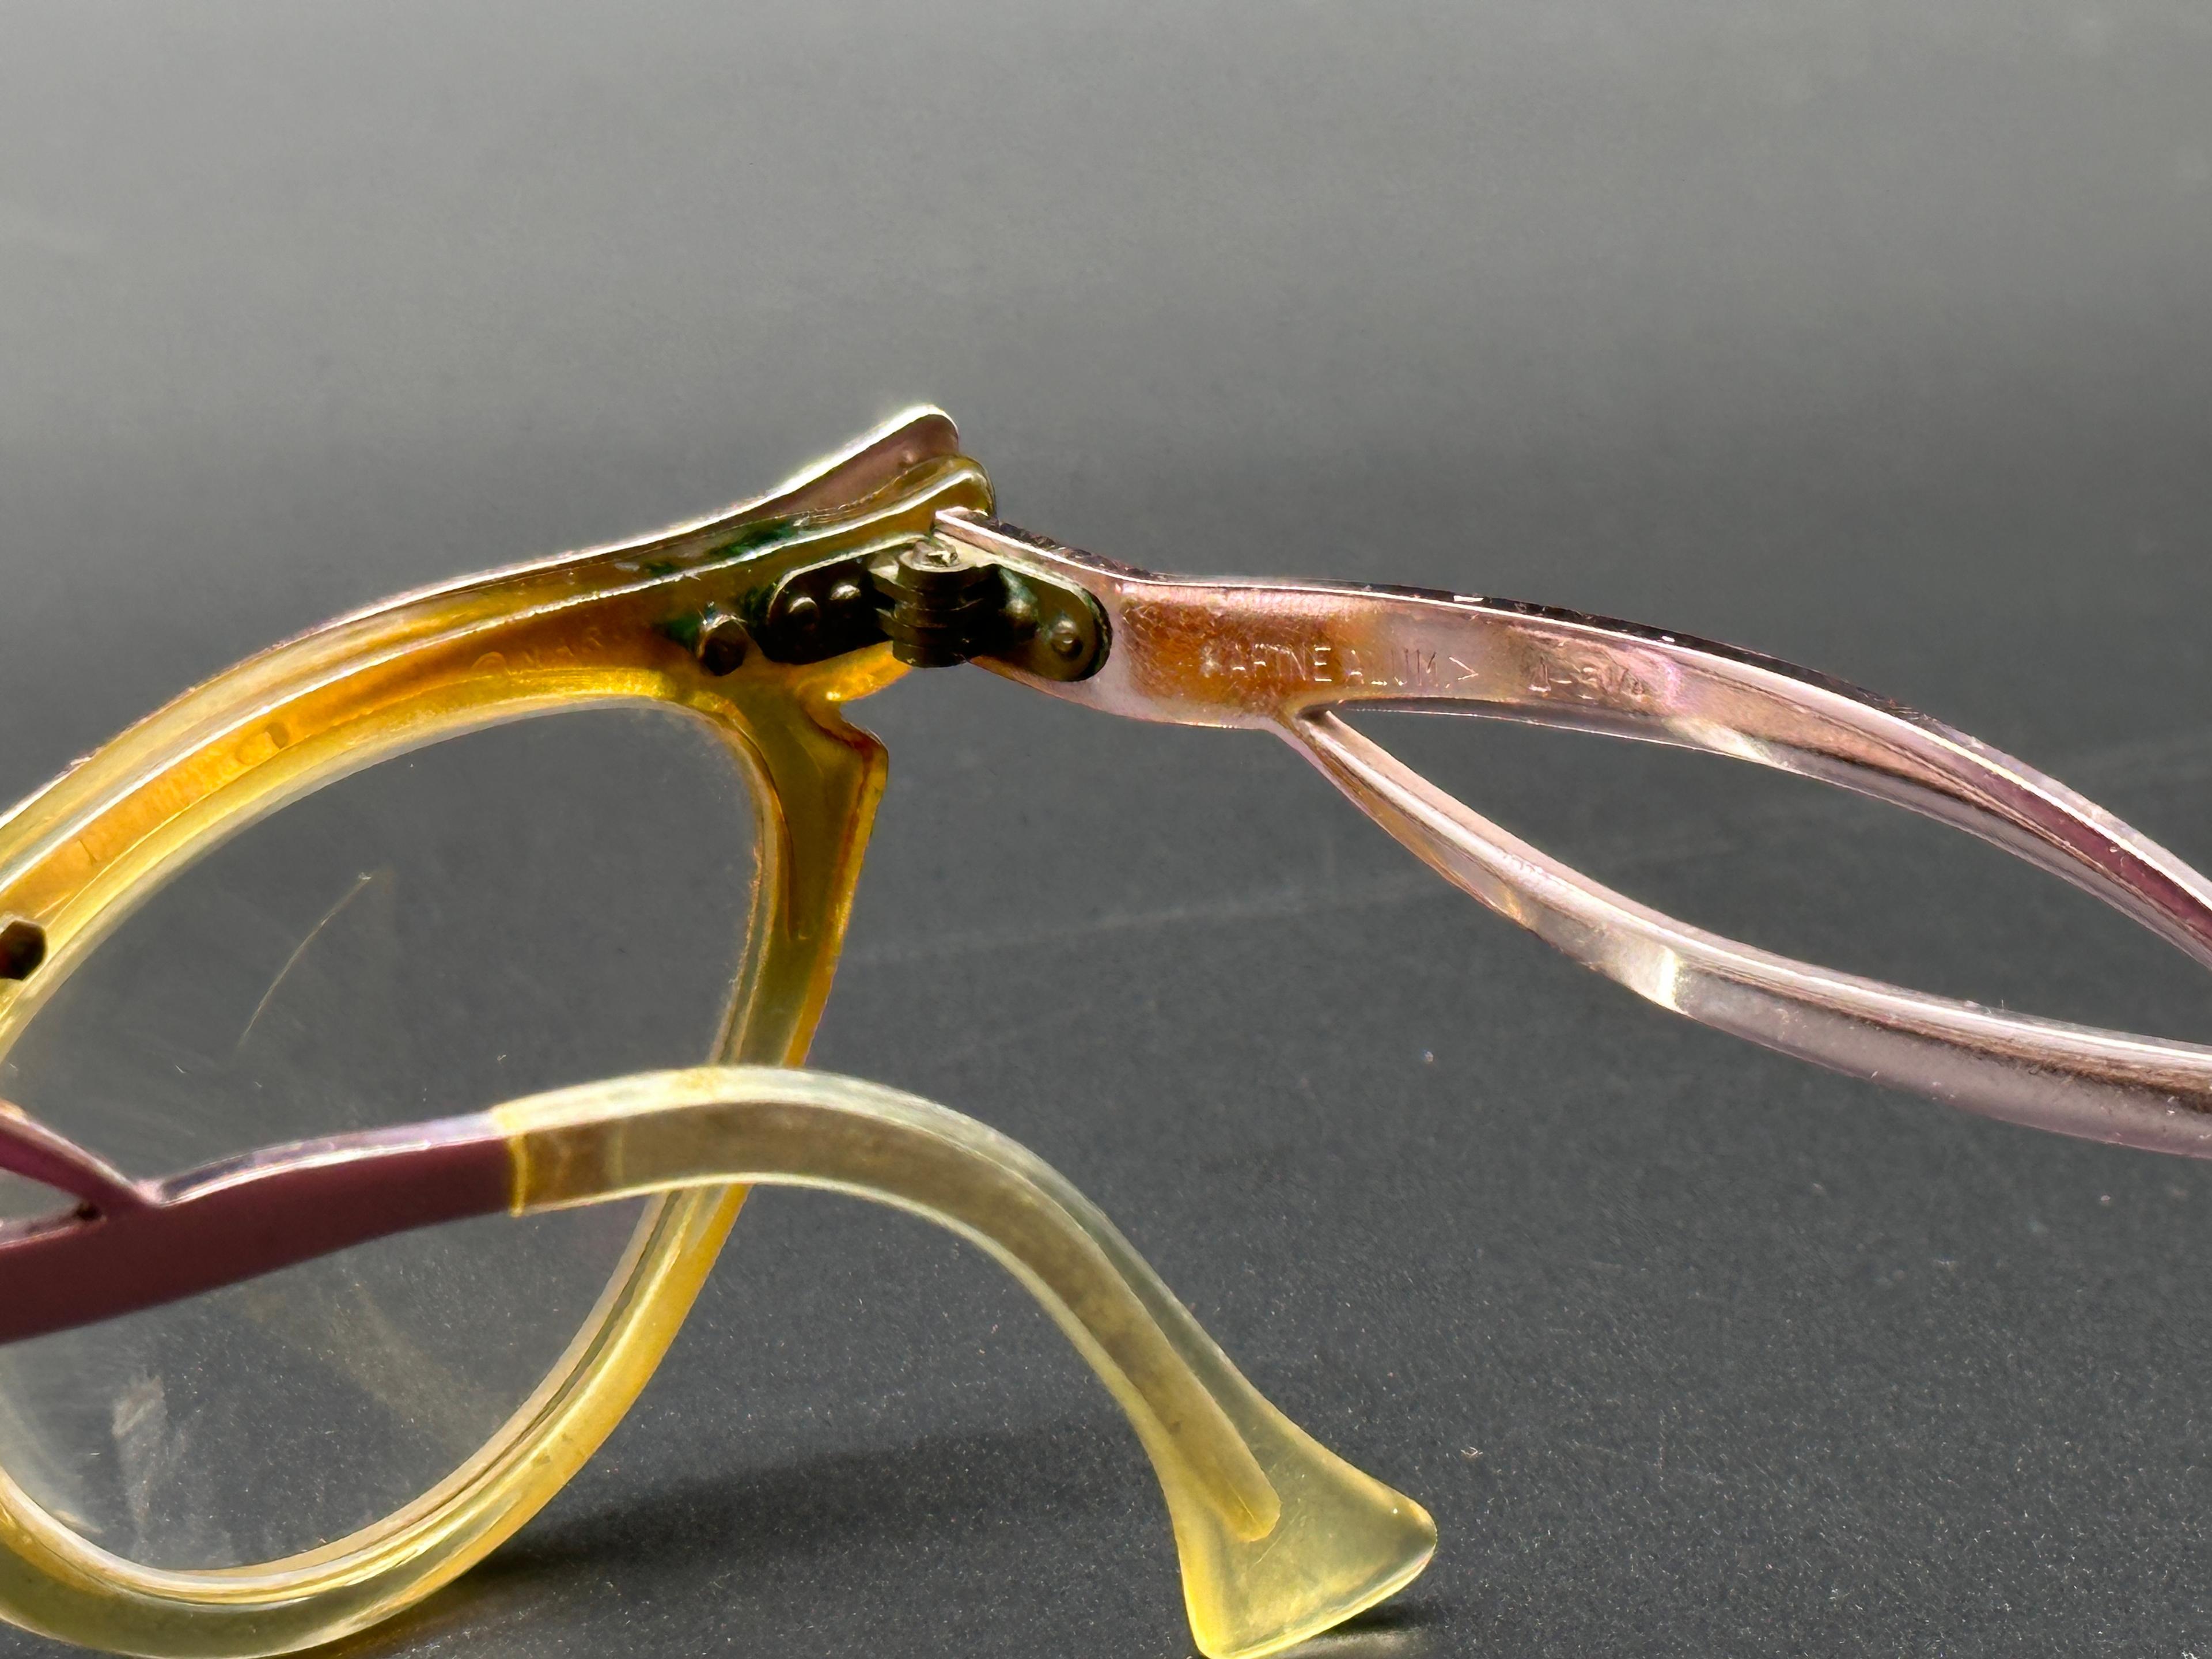 Beautiful Vintage Eye Glasses with Cases